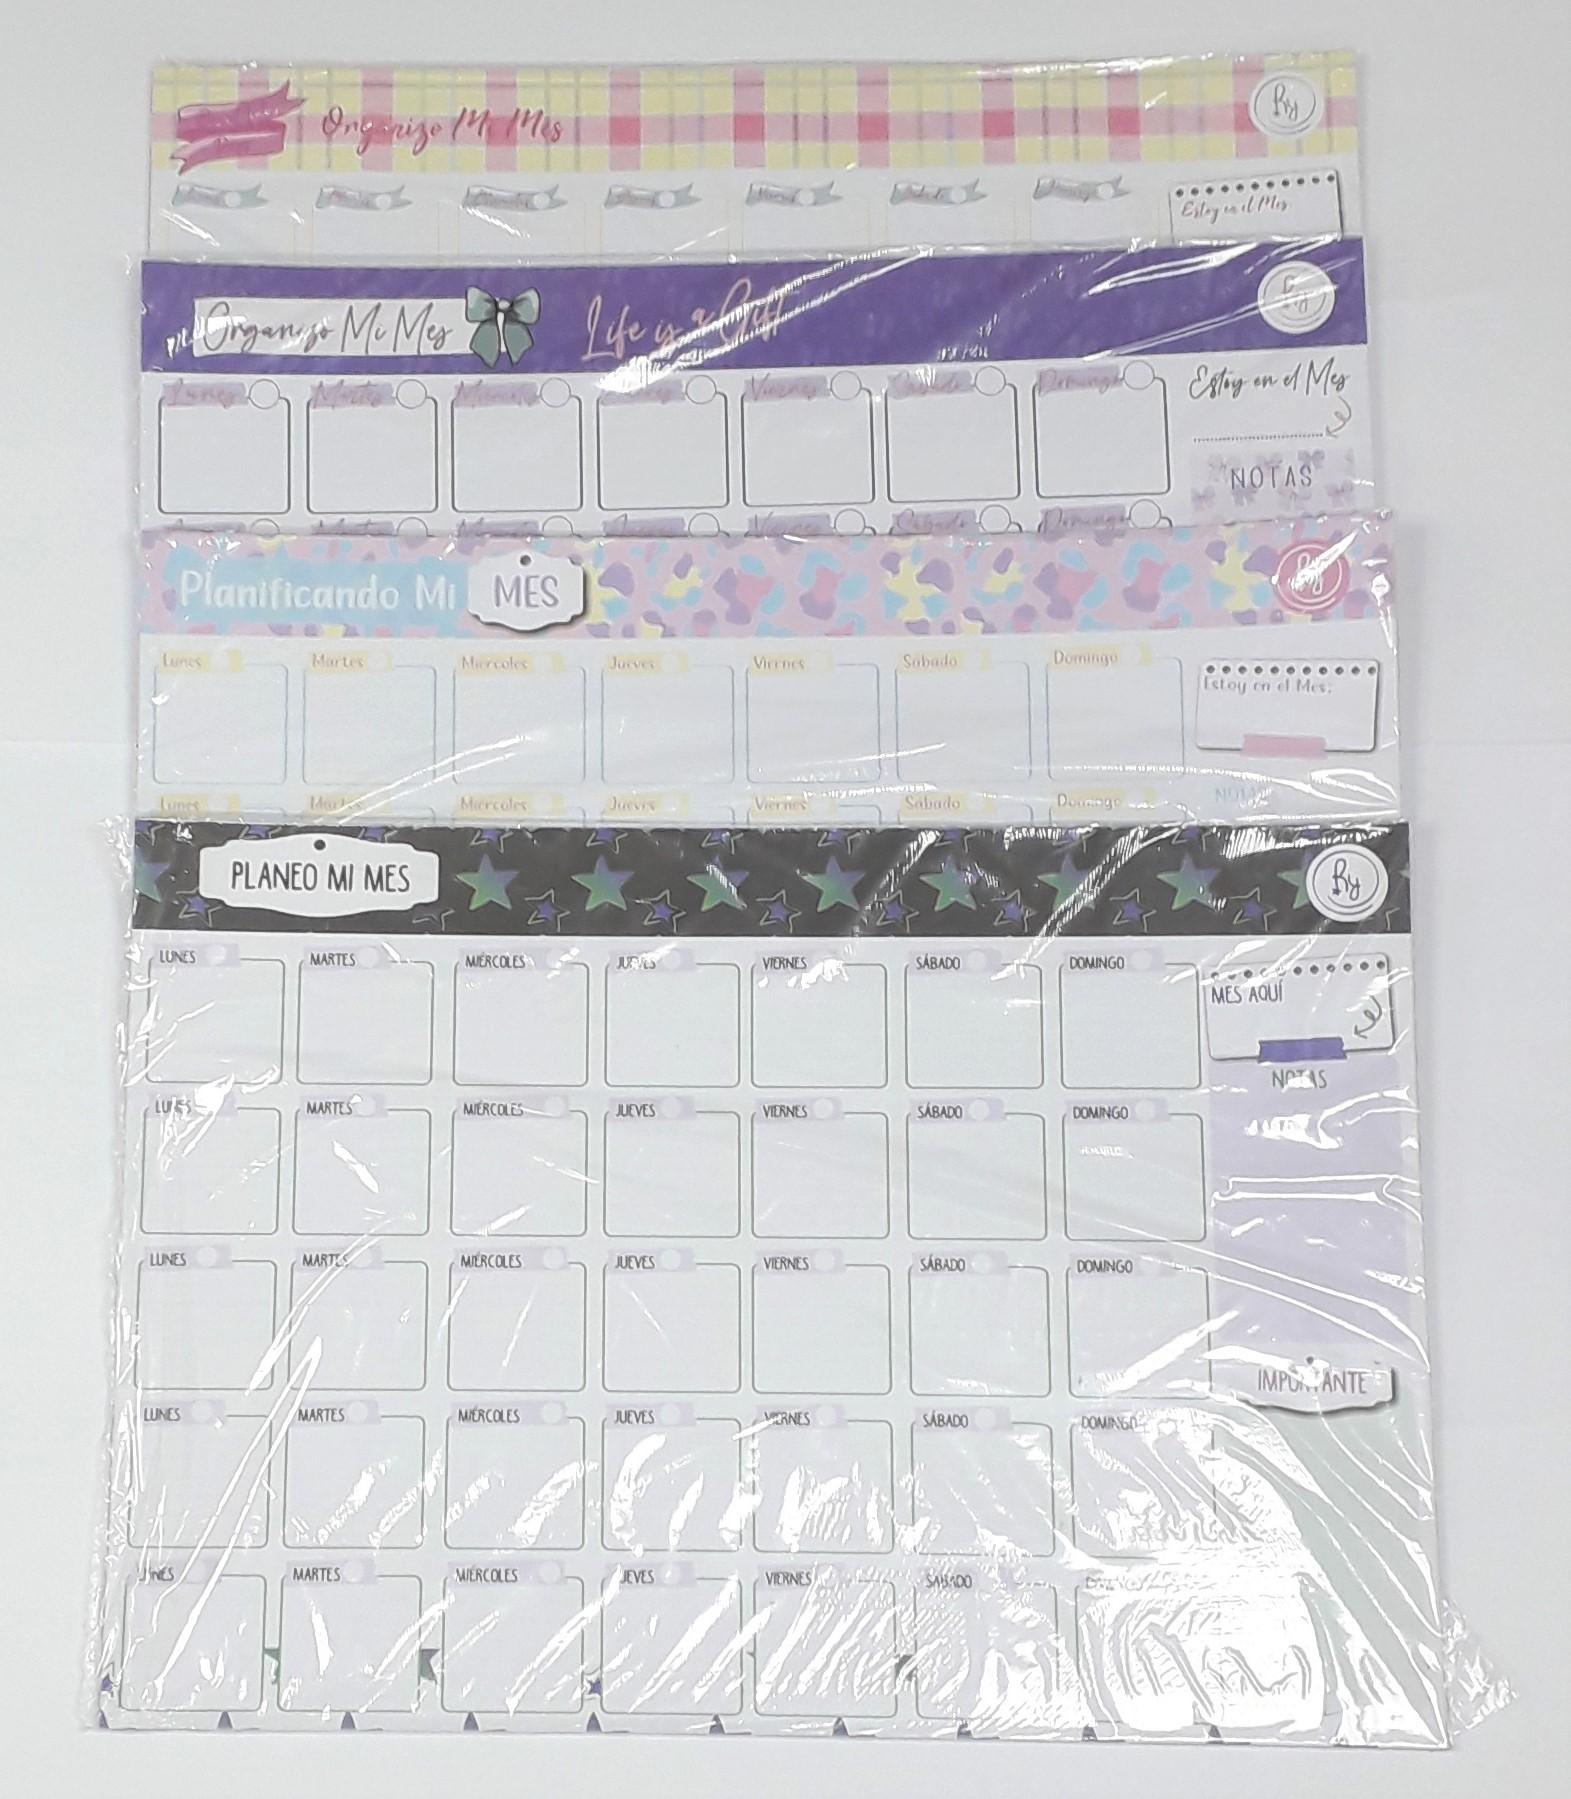 PLANNER MENSUAL A3 42 X 29.7 CM 20 HS-RY8018